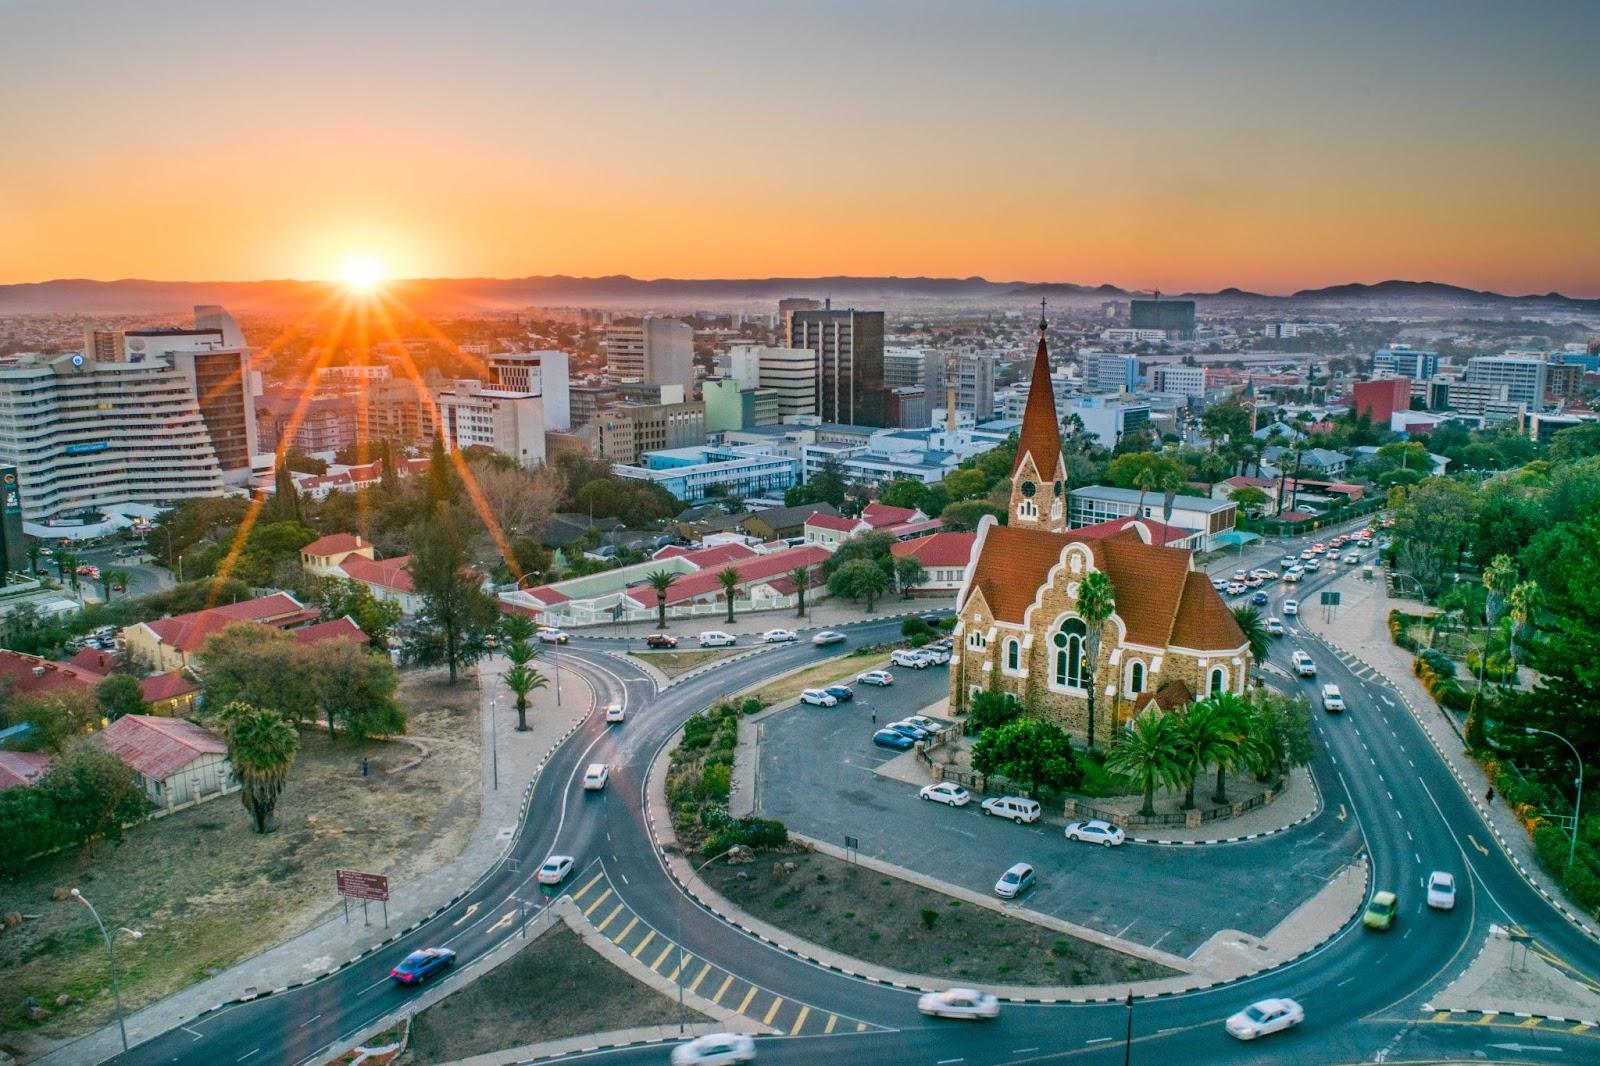 Aerial View of Namibia's Capital at Sunset - Windhoek, Namibia